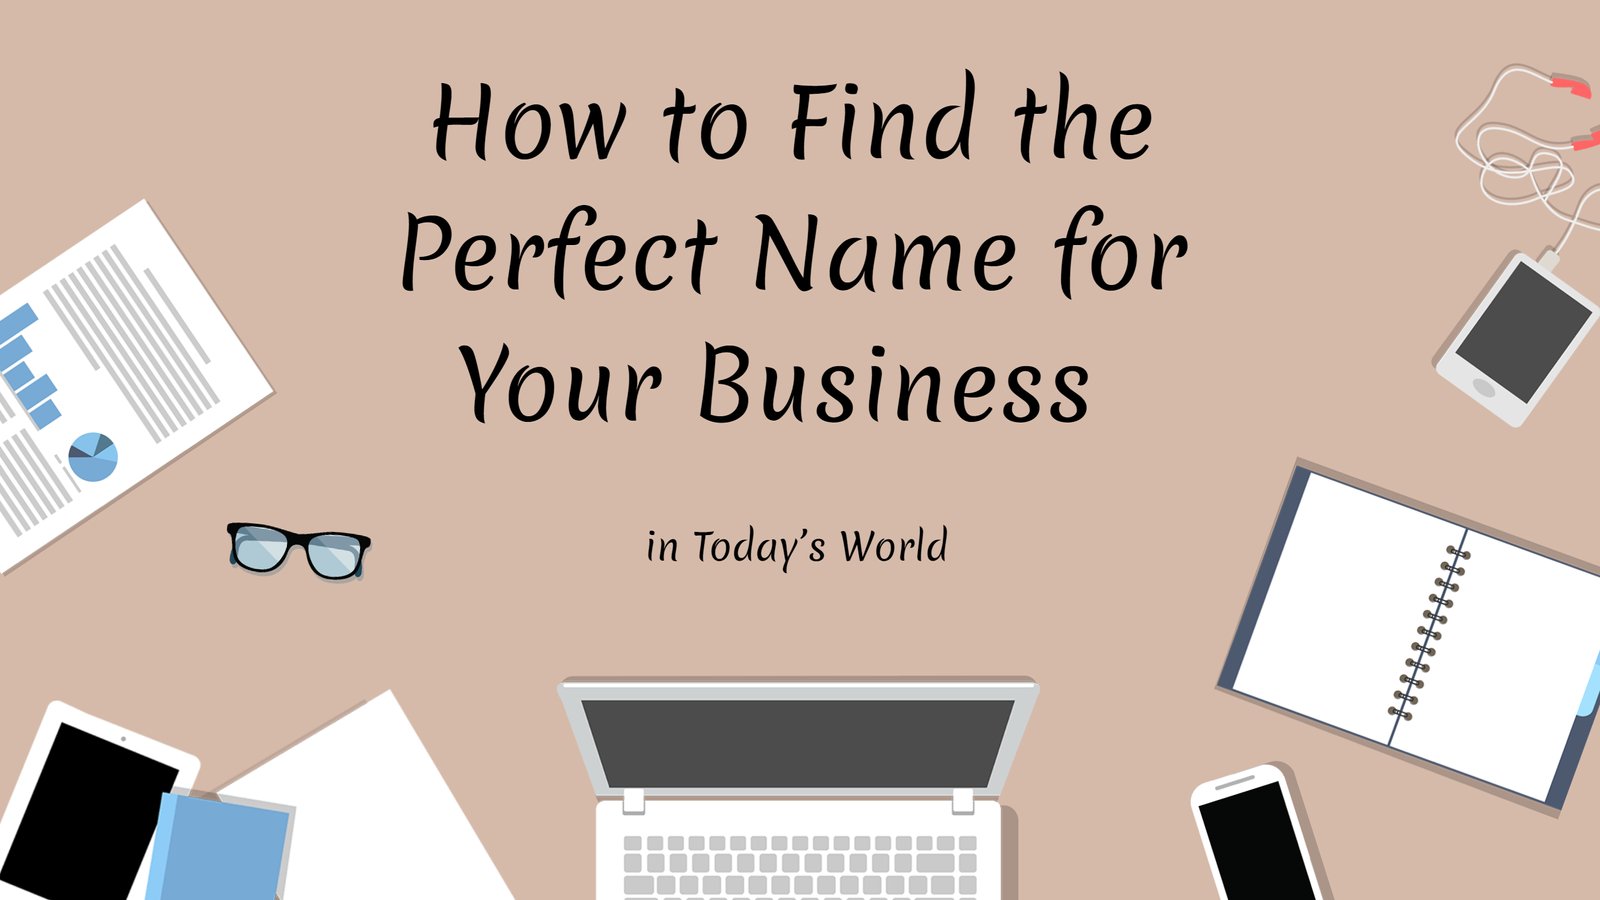 Businesspally hits Criteria to Choose a Business Name